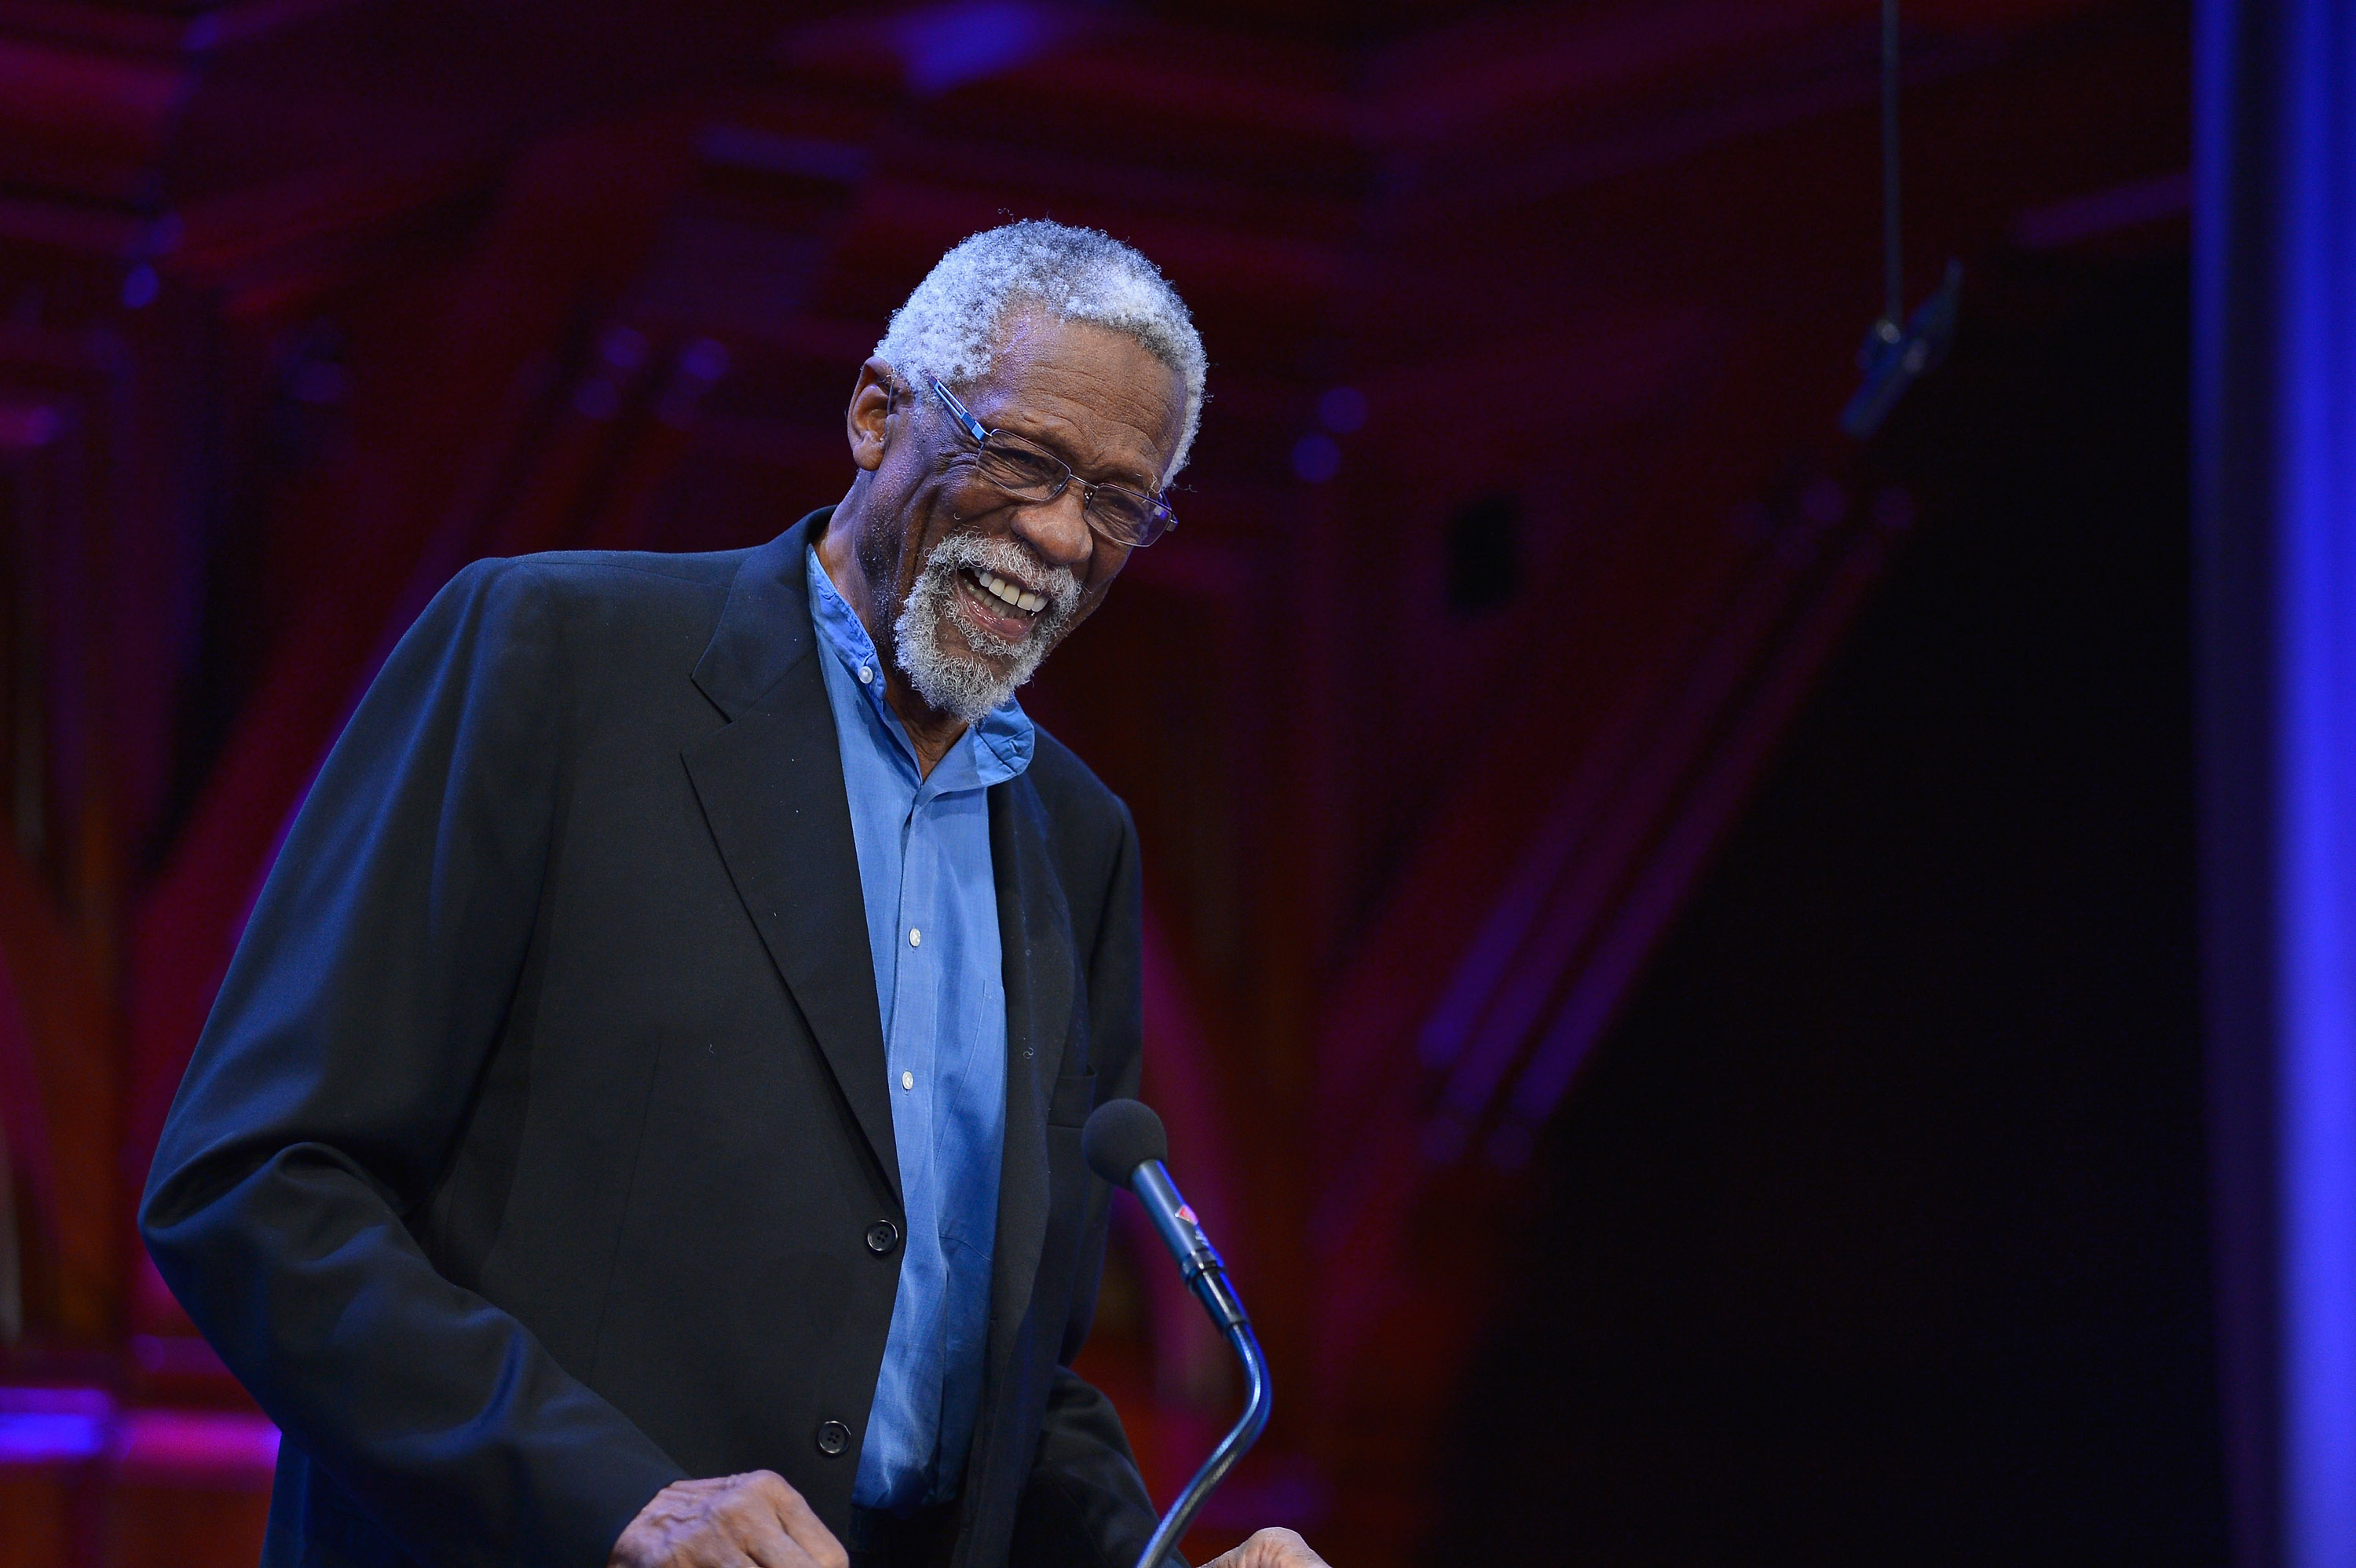 Bill Russell shares his true feelings about 2020.